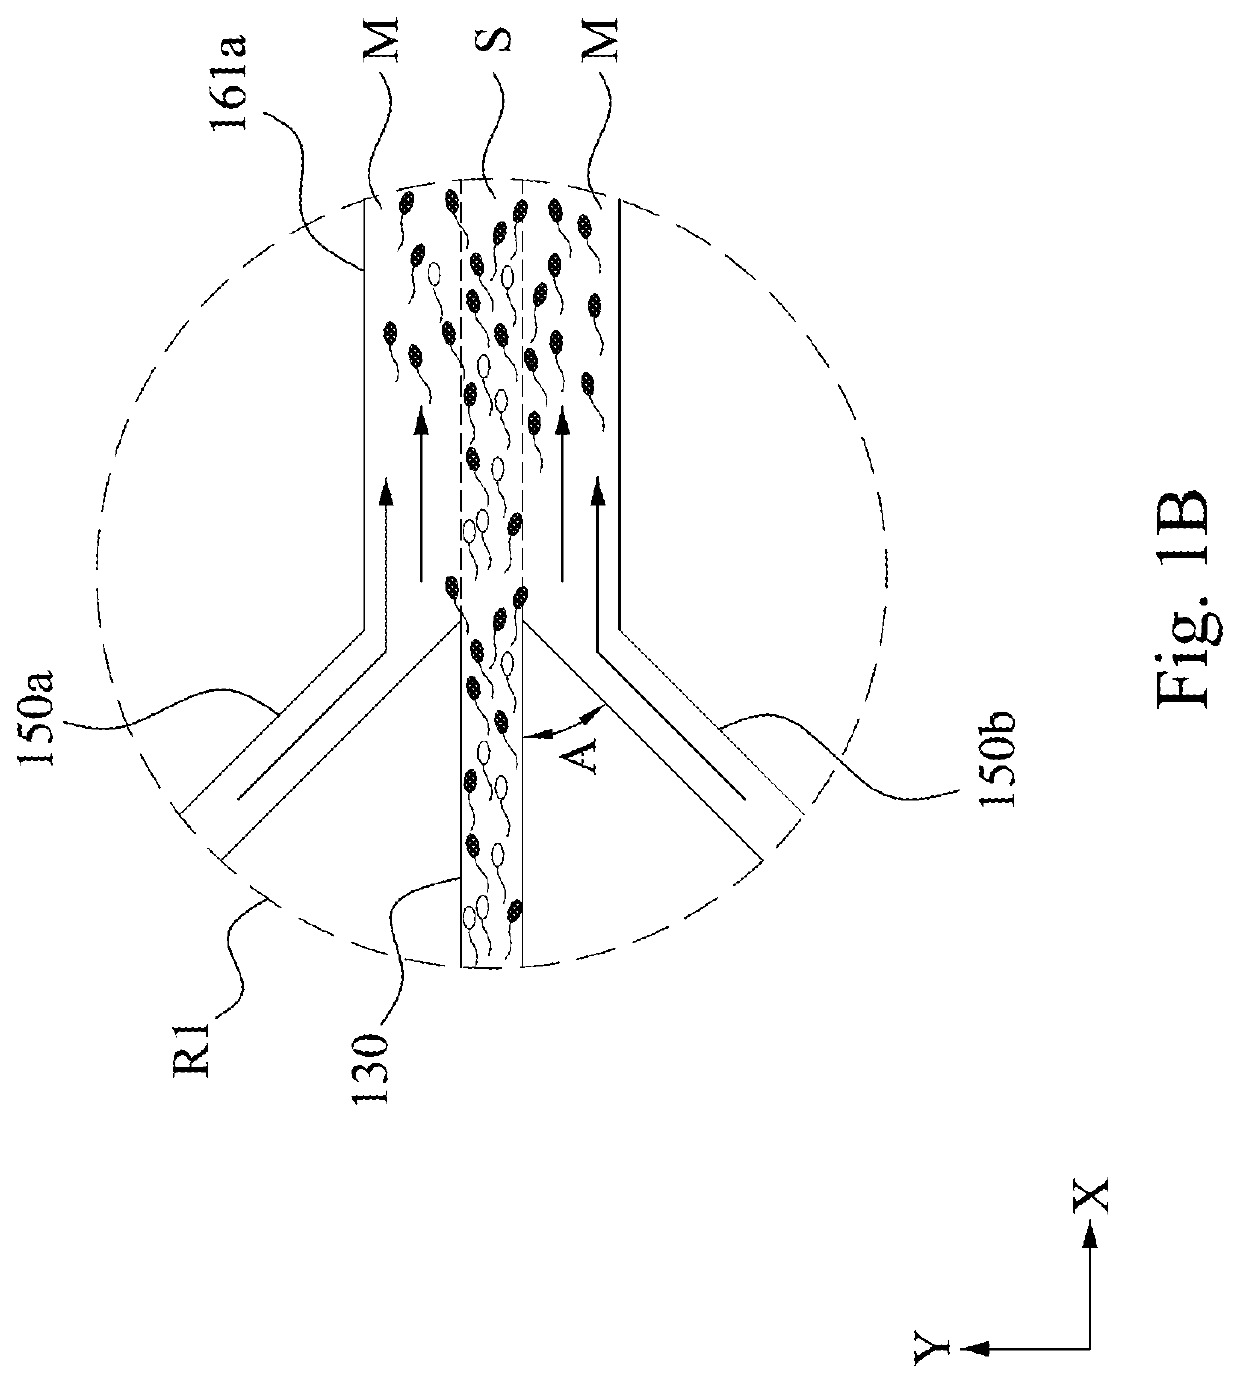 Microfluidic chip for sorting sperm and sperm sorting method